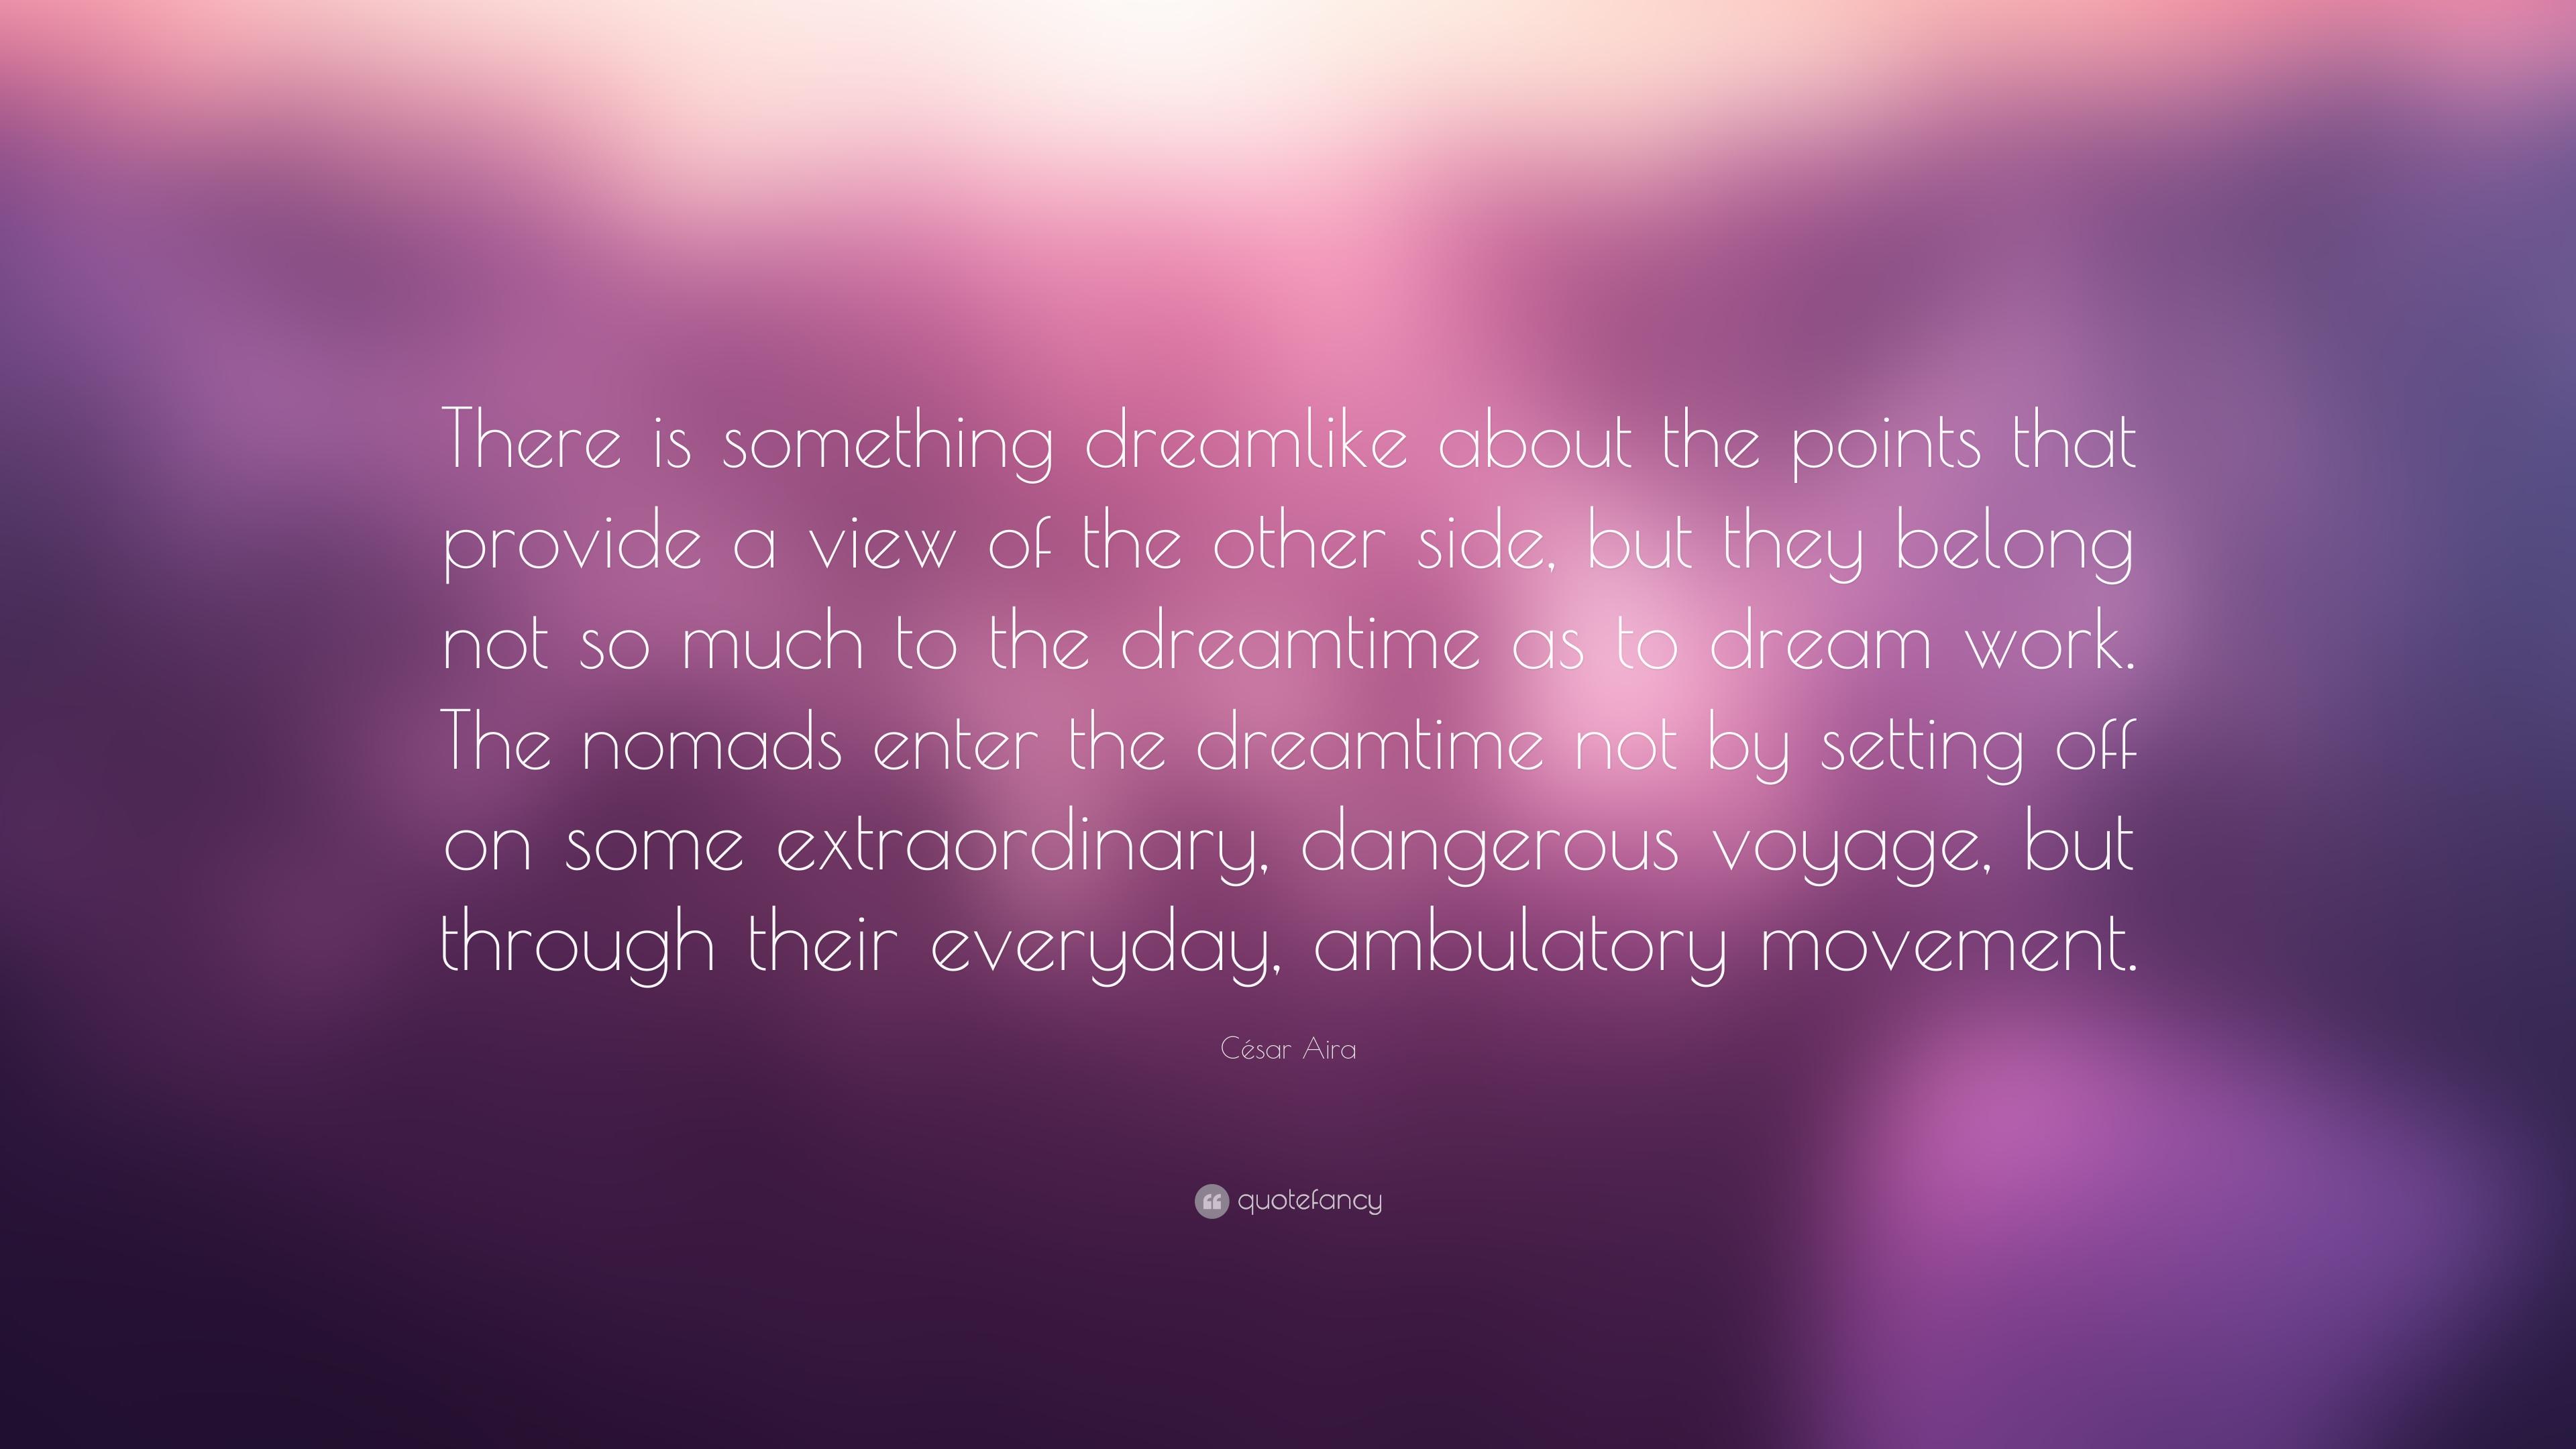 César Aira Quote: “There is something dreamlike about